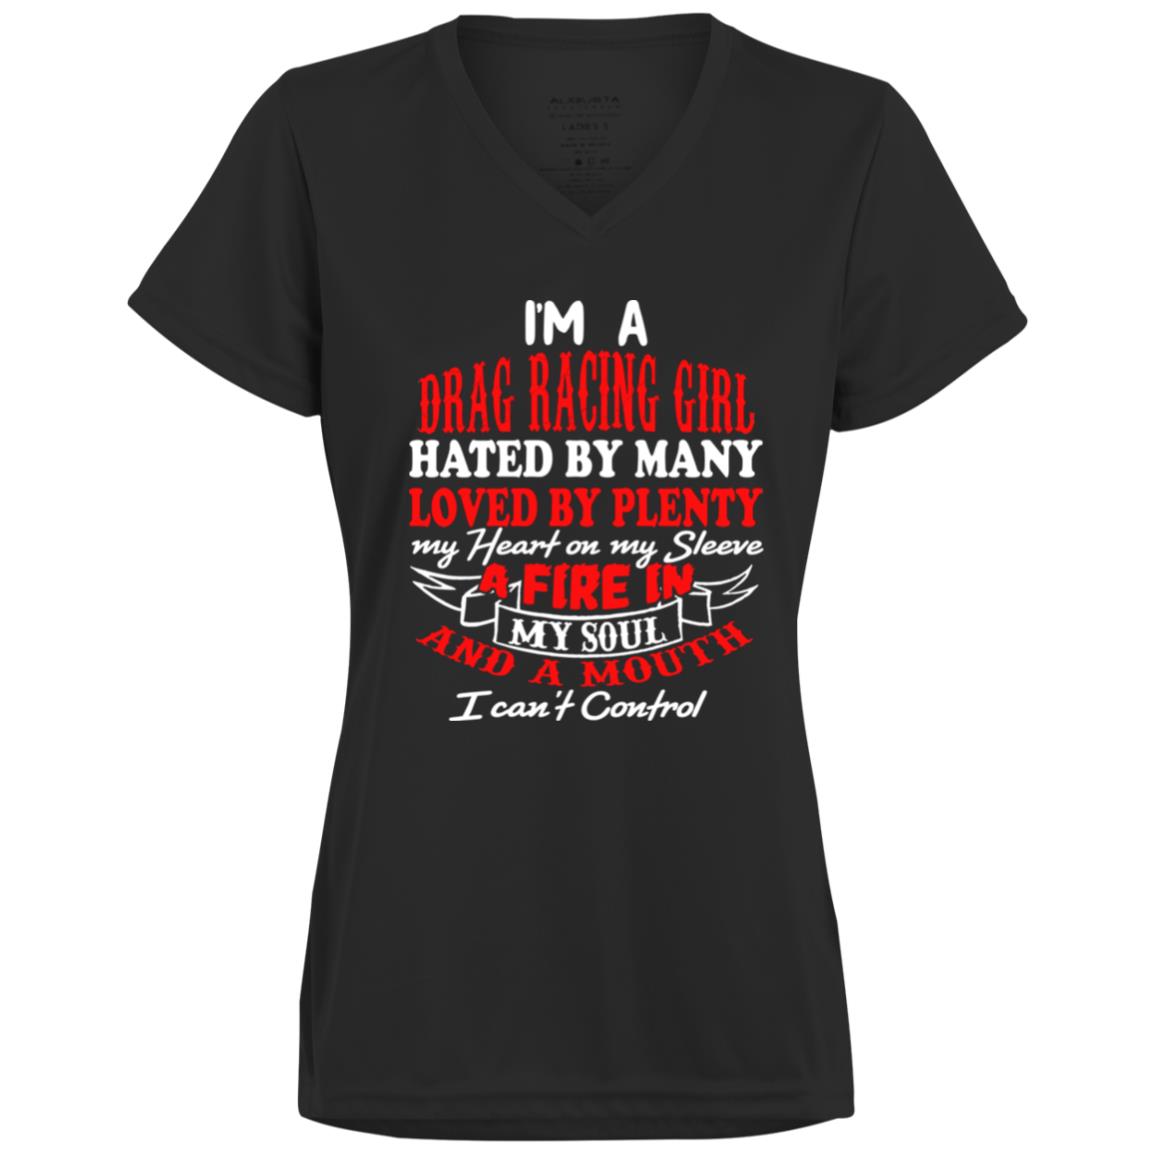 I'm A Drag Racing Girl Hated By Many Loved By Plenty Ladies’ Moisture-Wicking V-Neck Tee